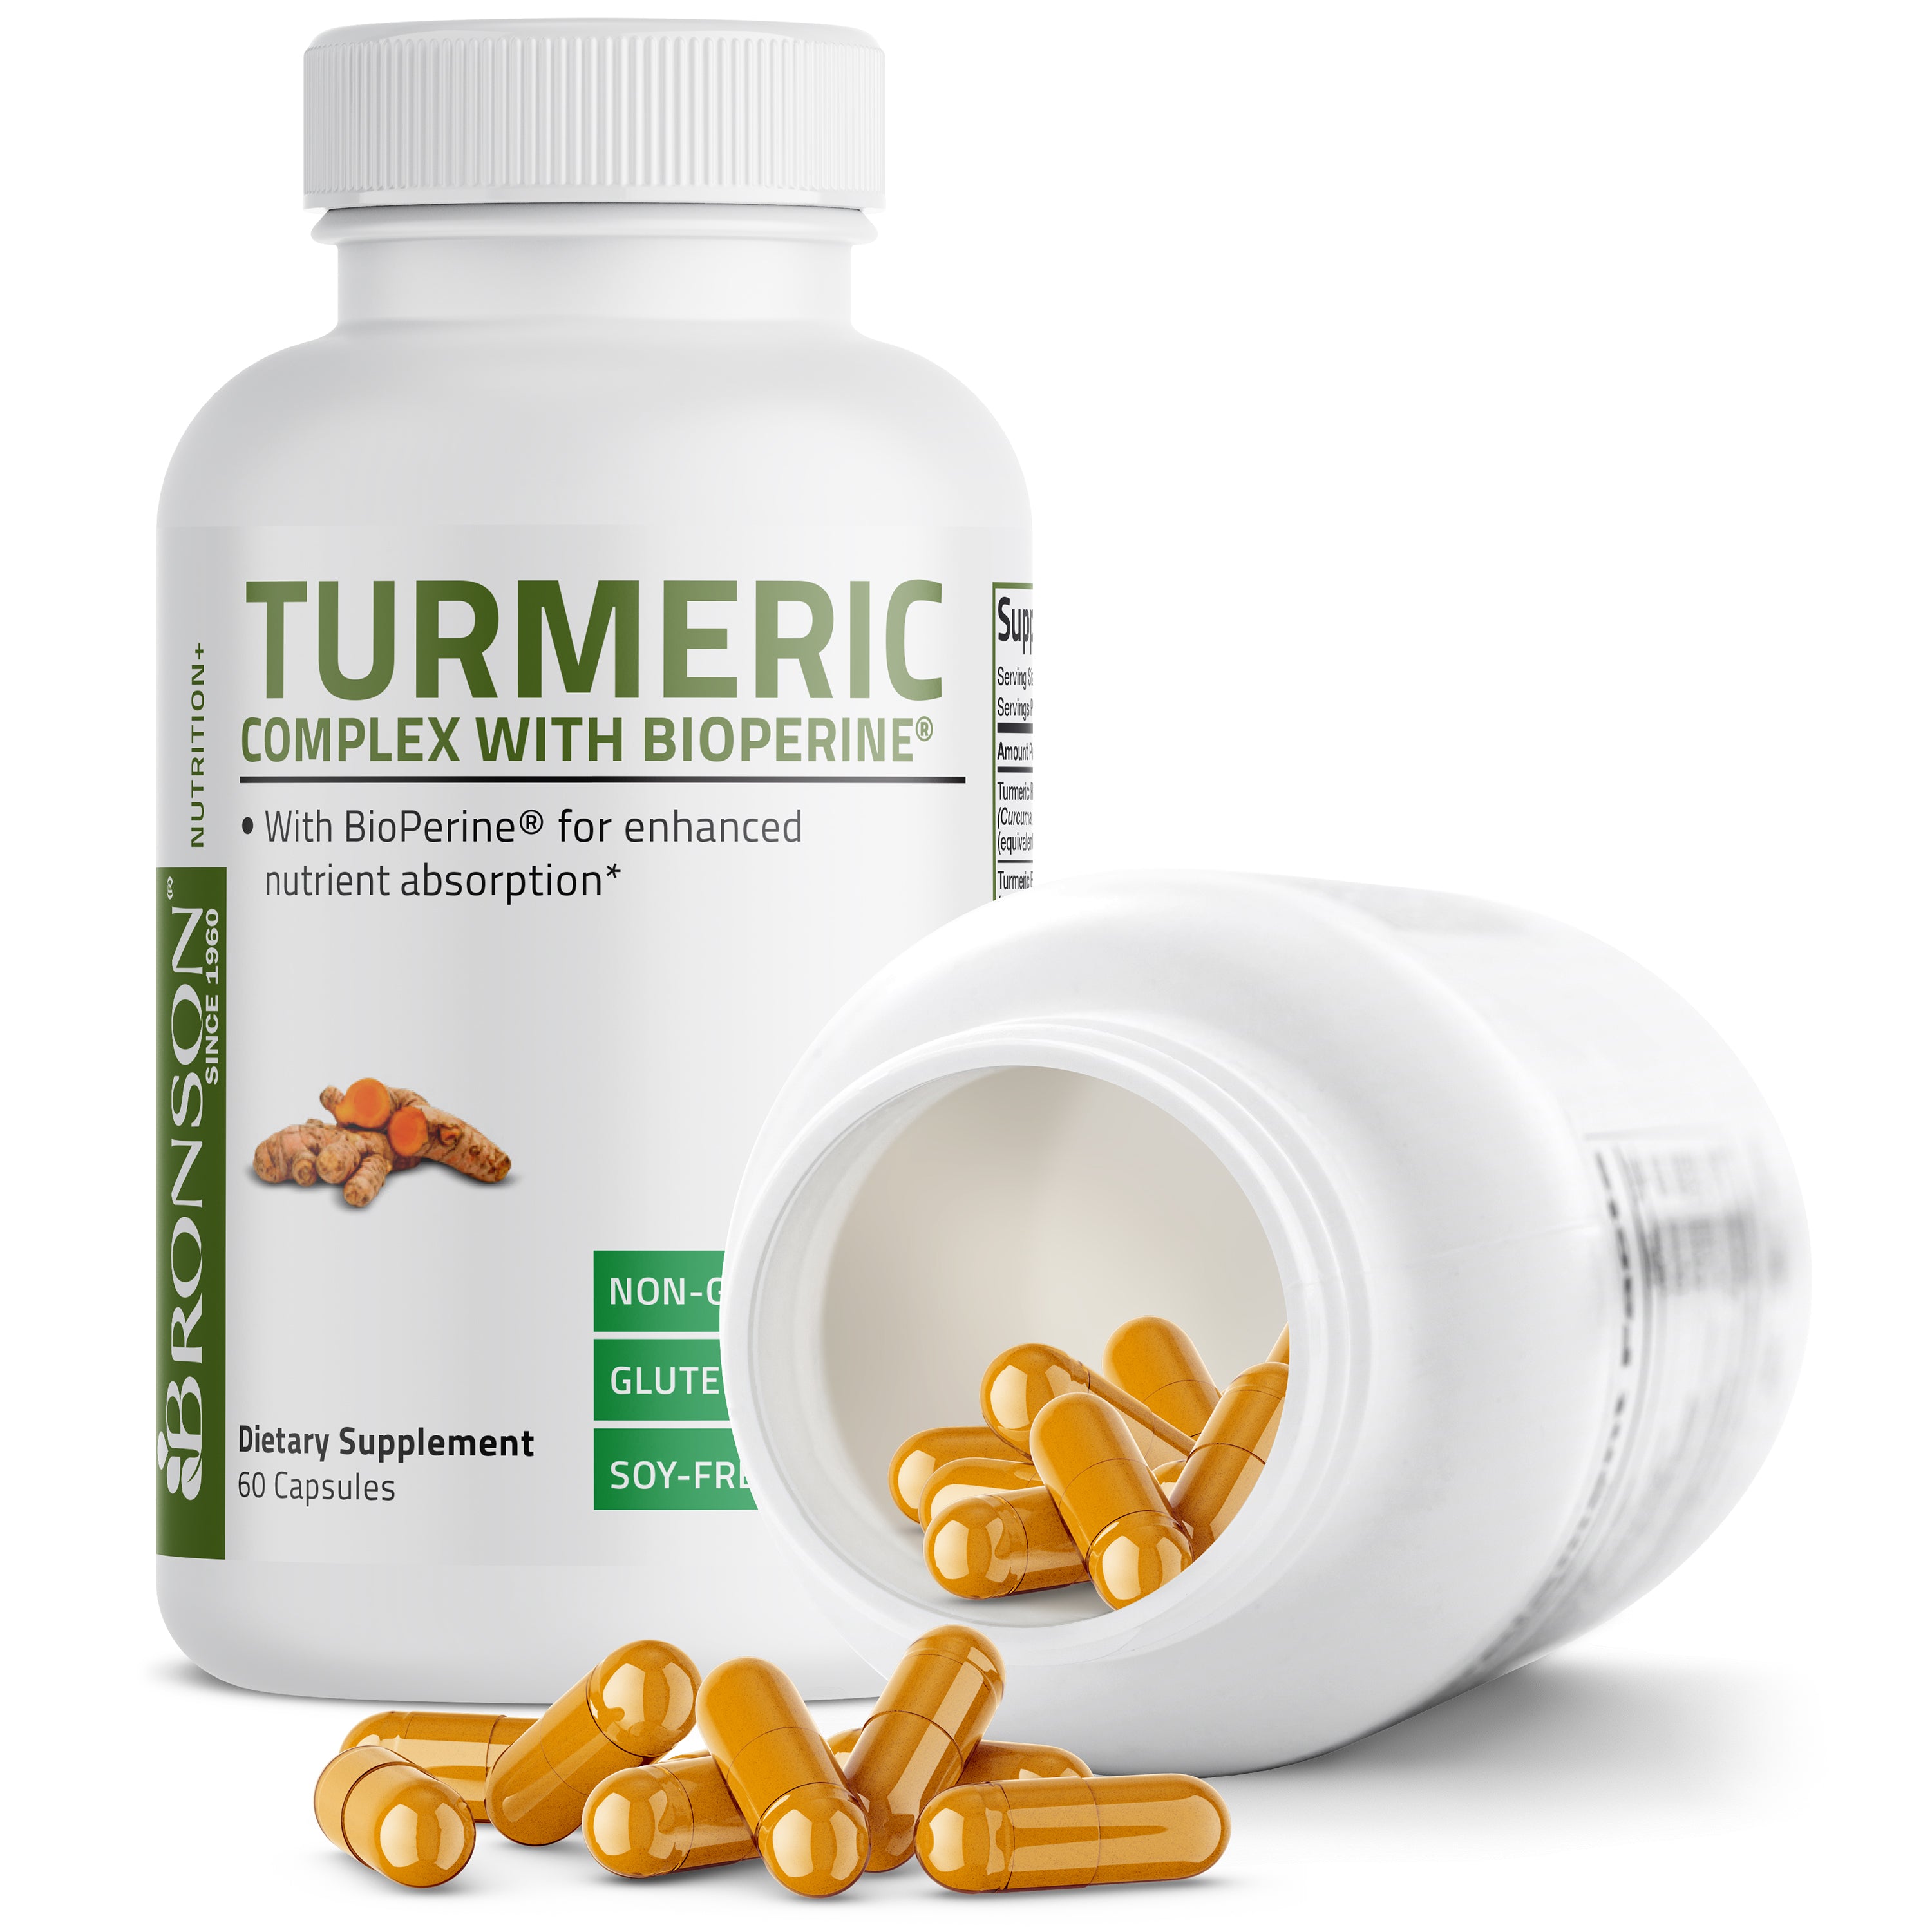 Turmeric Complex with BioPerine® - 1,000 mg view 5 of 6